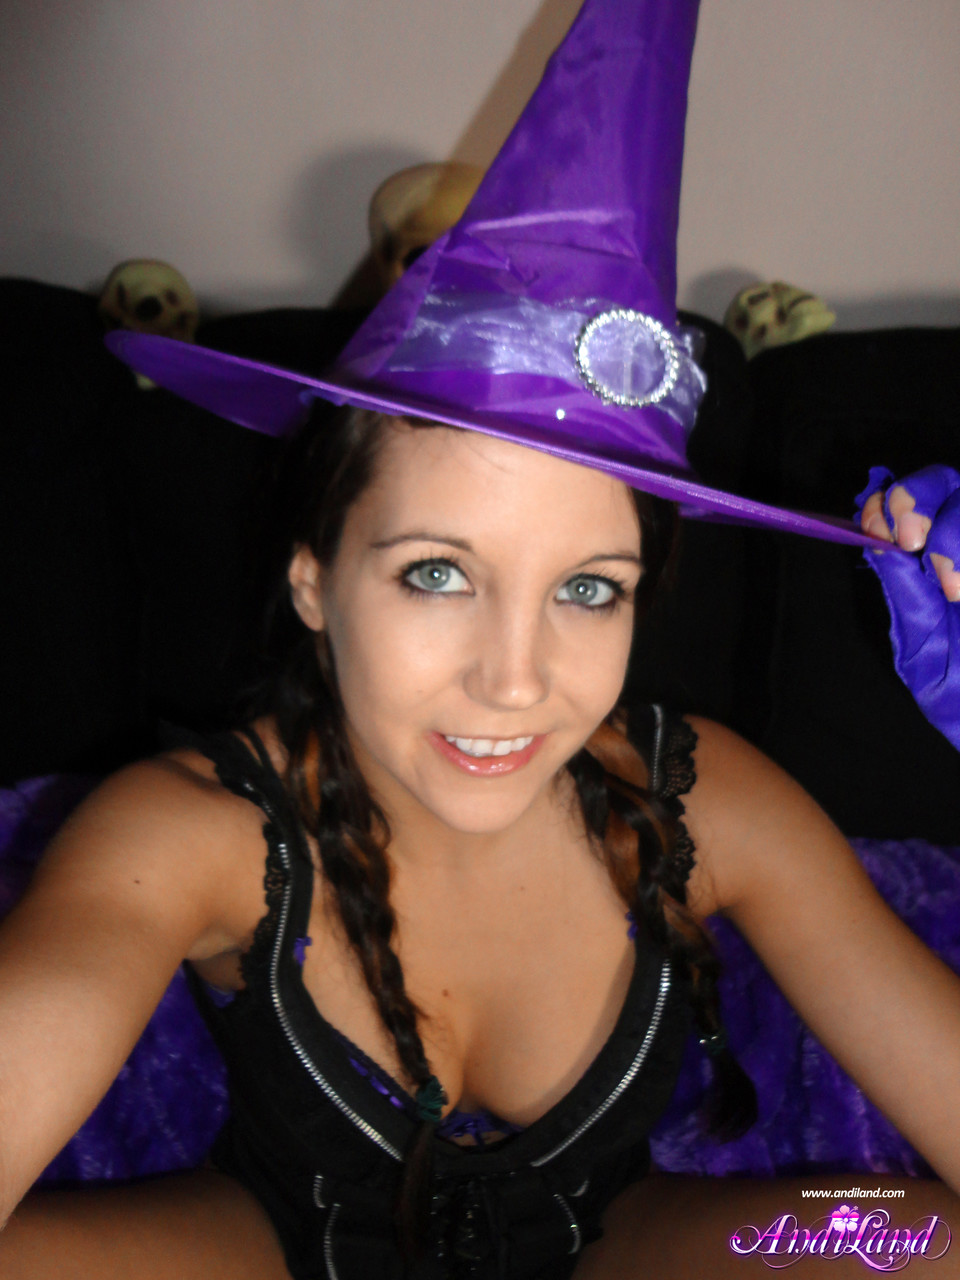 Teen amateur Andi Land teases during upskirt action in a Halloween outfit photo porno #428432666